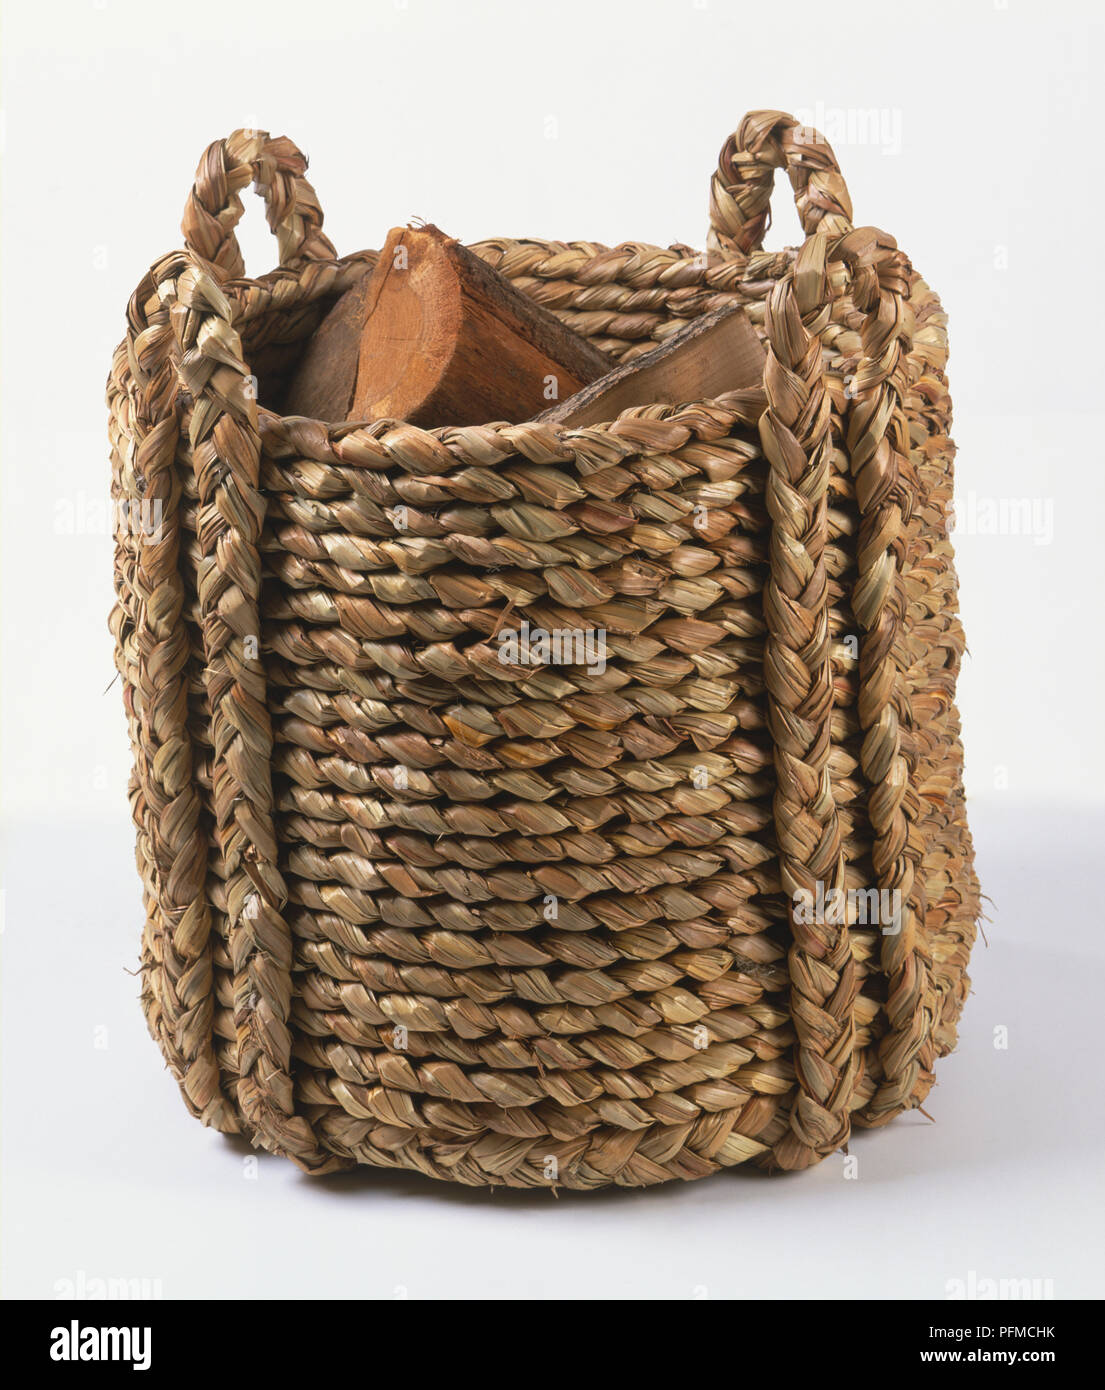 Woven grass log basket, sturdy design with two handles, stored logs visible, angled front view. Stock Photo